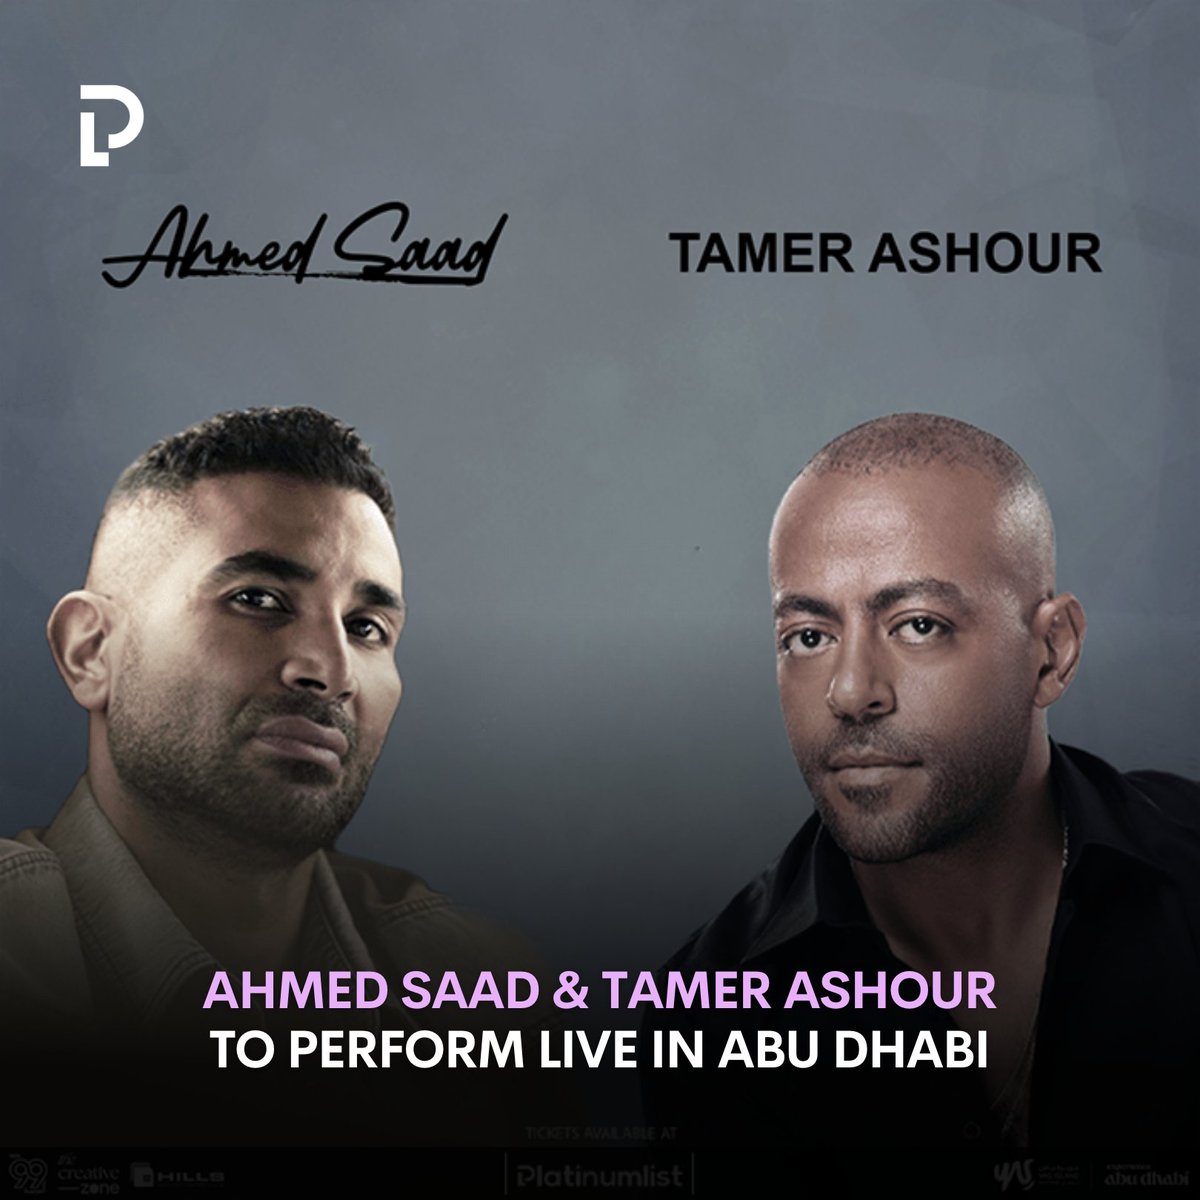 🔔 TICKETS OUT NOW! Don't miss it. For the first time in the UAE, Ahmed Saad & Tamer Ashour sharing the stage together for one night only! ✨ Book tickets now via Platinumlist App or Link in Bio. 📲